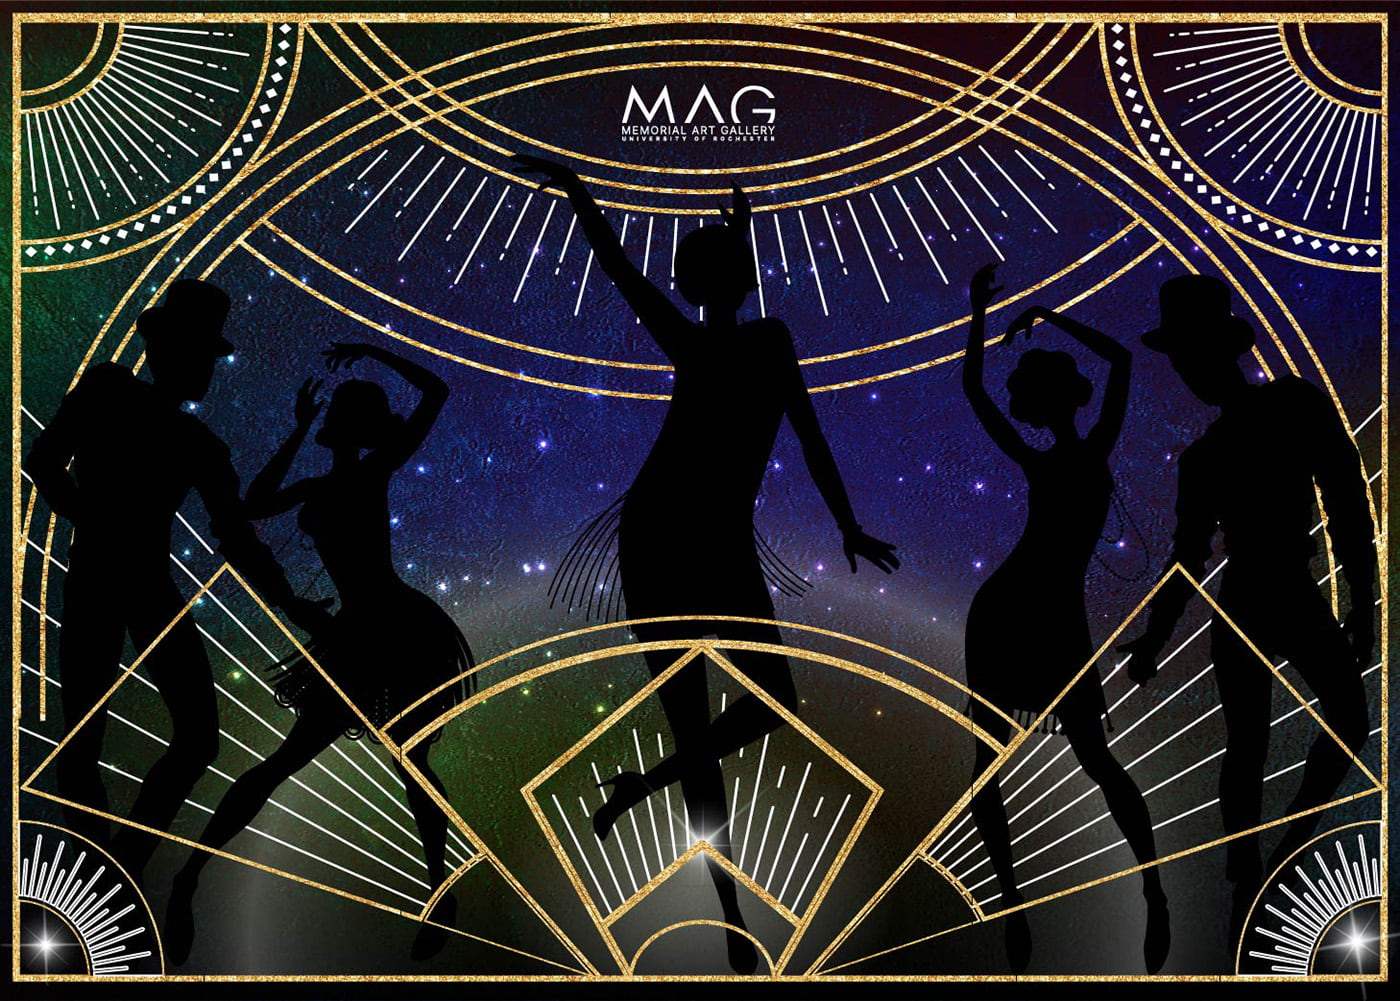 Silhouettes of 1920s dancers against a dark background, surrounded by bright gold Art Deco-inspired decorative elements.